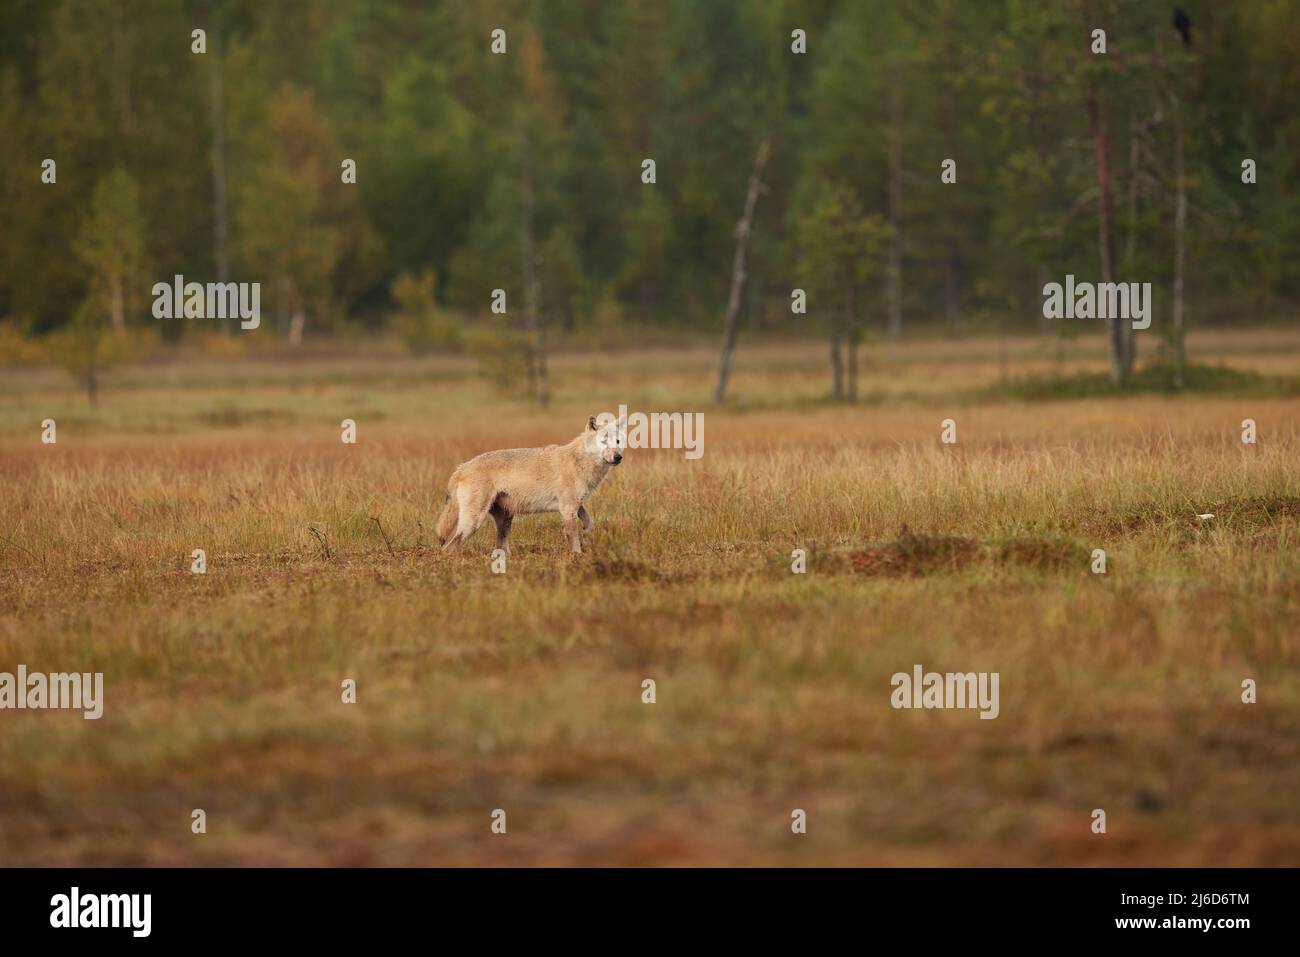 A gray wolf in a distance on an open plain Stock Photo